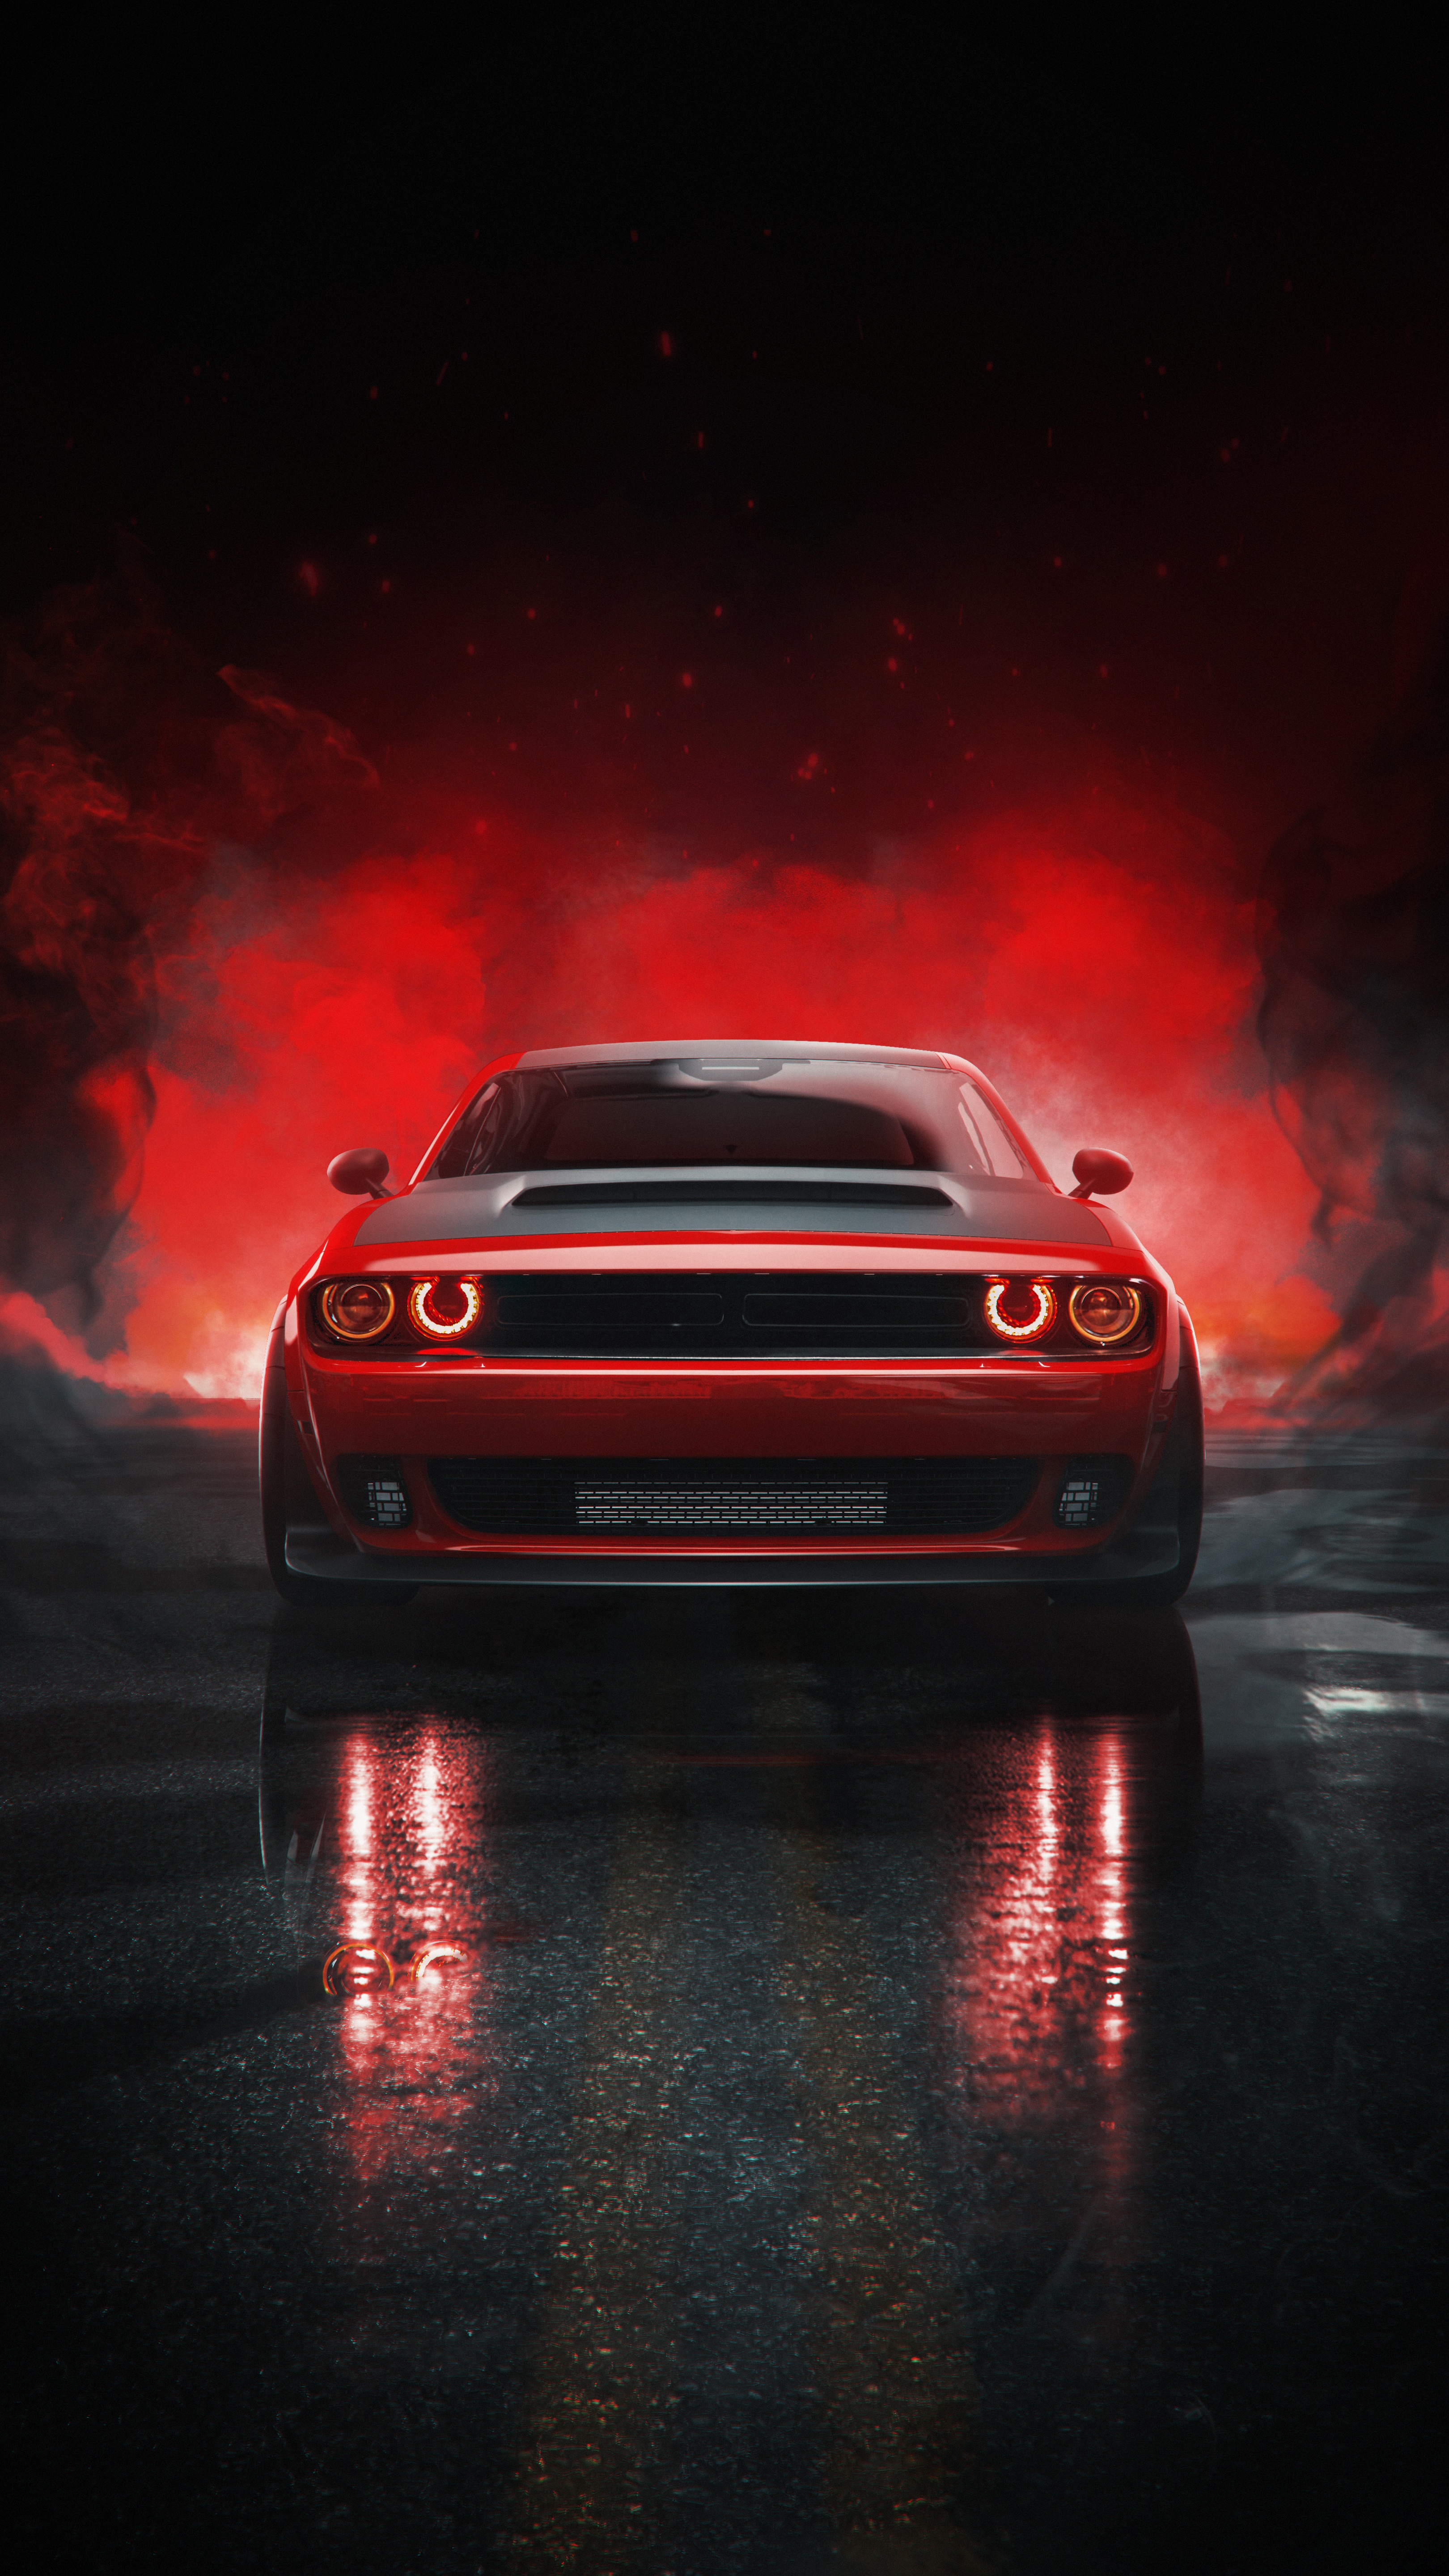 Free download Dodge Charger Wallpaper hd Iphone Dodge Charger hd Wallpaper  1080x1920 for your Desktop Mobile  Tablet  Explore 50 iPhone Dodge  Wallpaper  Dodge Wallpapers Dodge Truck Wallpaper Dodge Charger Wallpaper